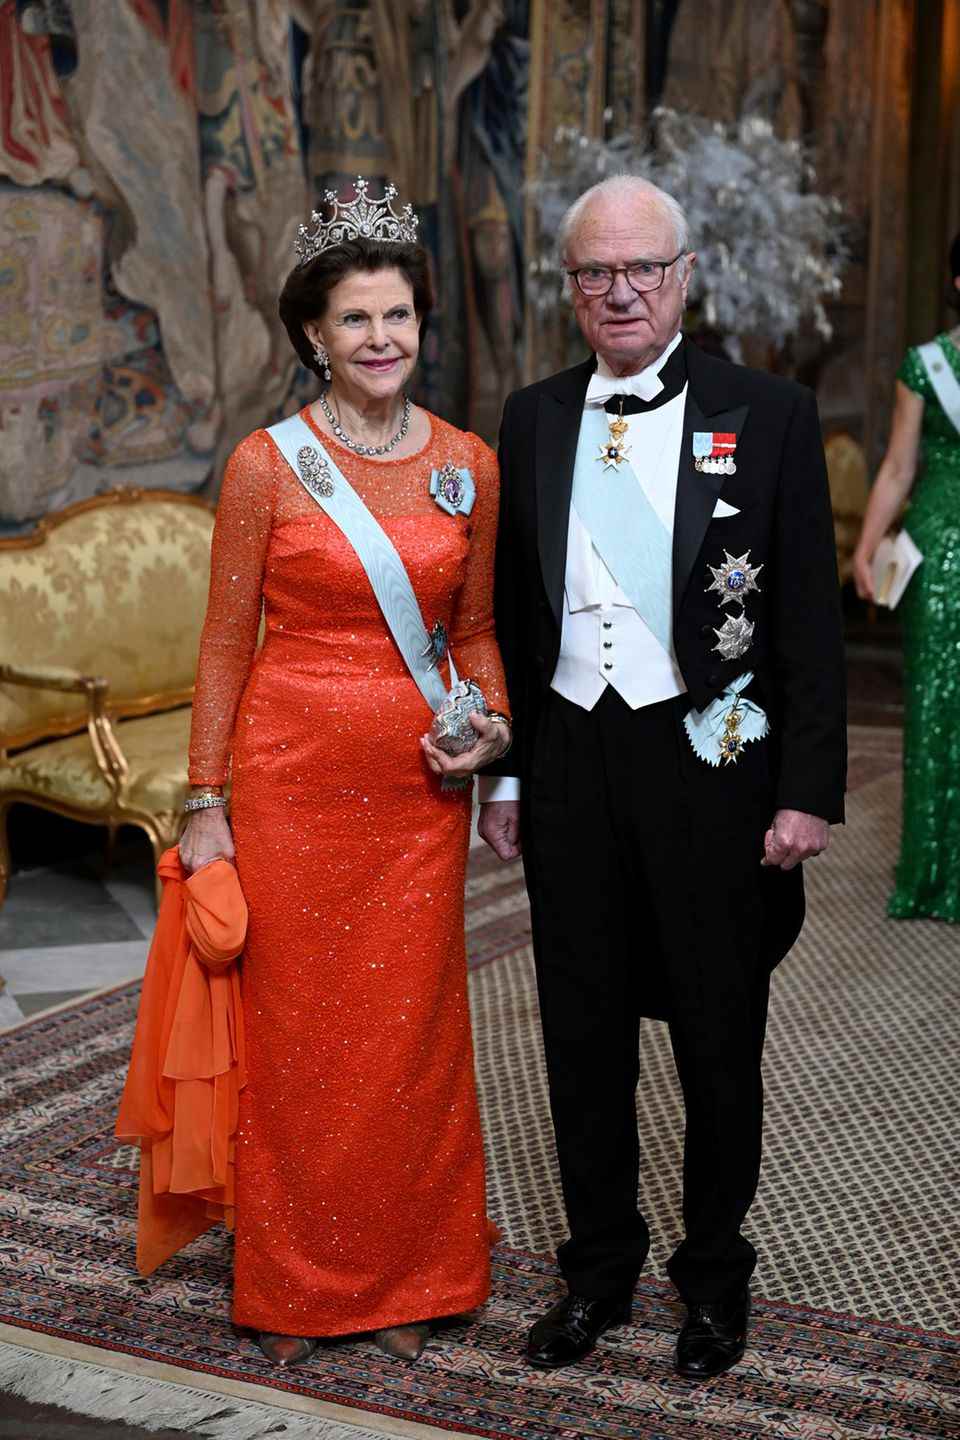 Queen Silvia shines with a dress and tiara at the royal dinner in Stockholm.